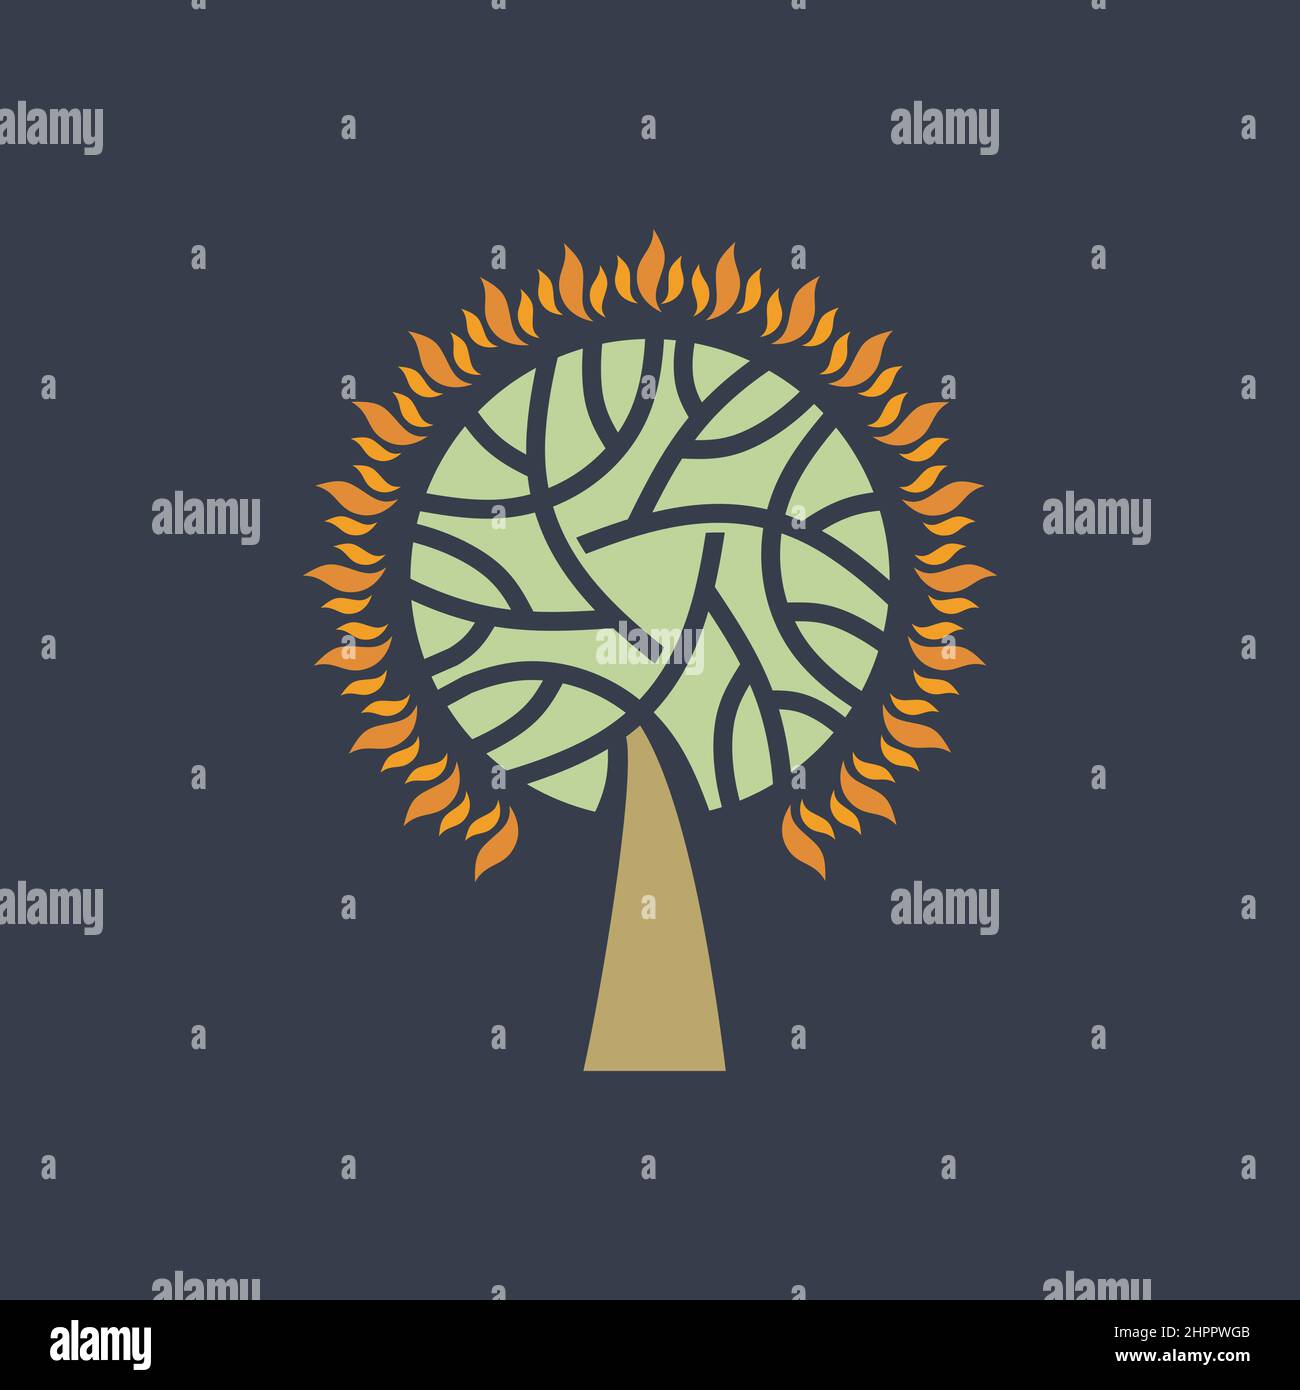 A wonderful plant. The burning bush that the prophet Moses saw. Bible illustration. Stock Vector